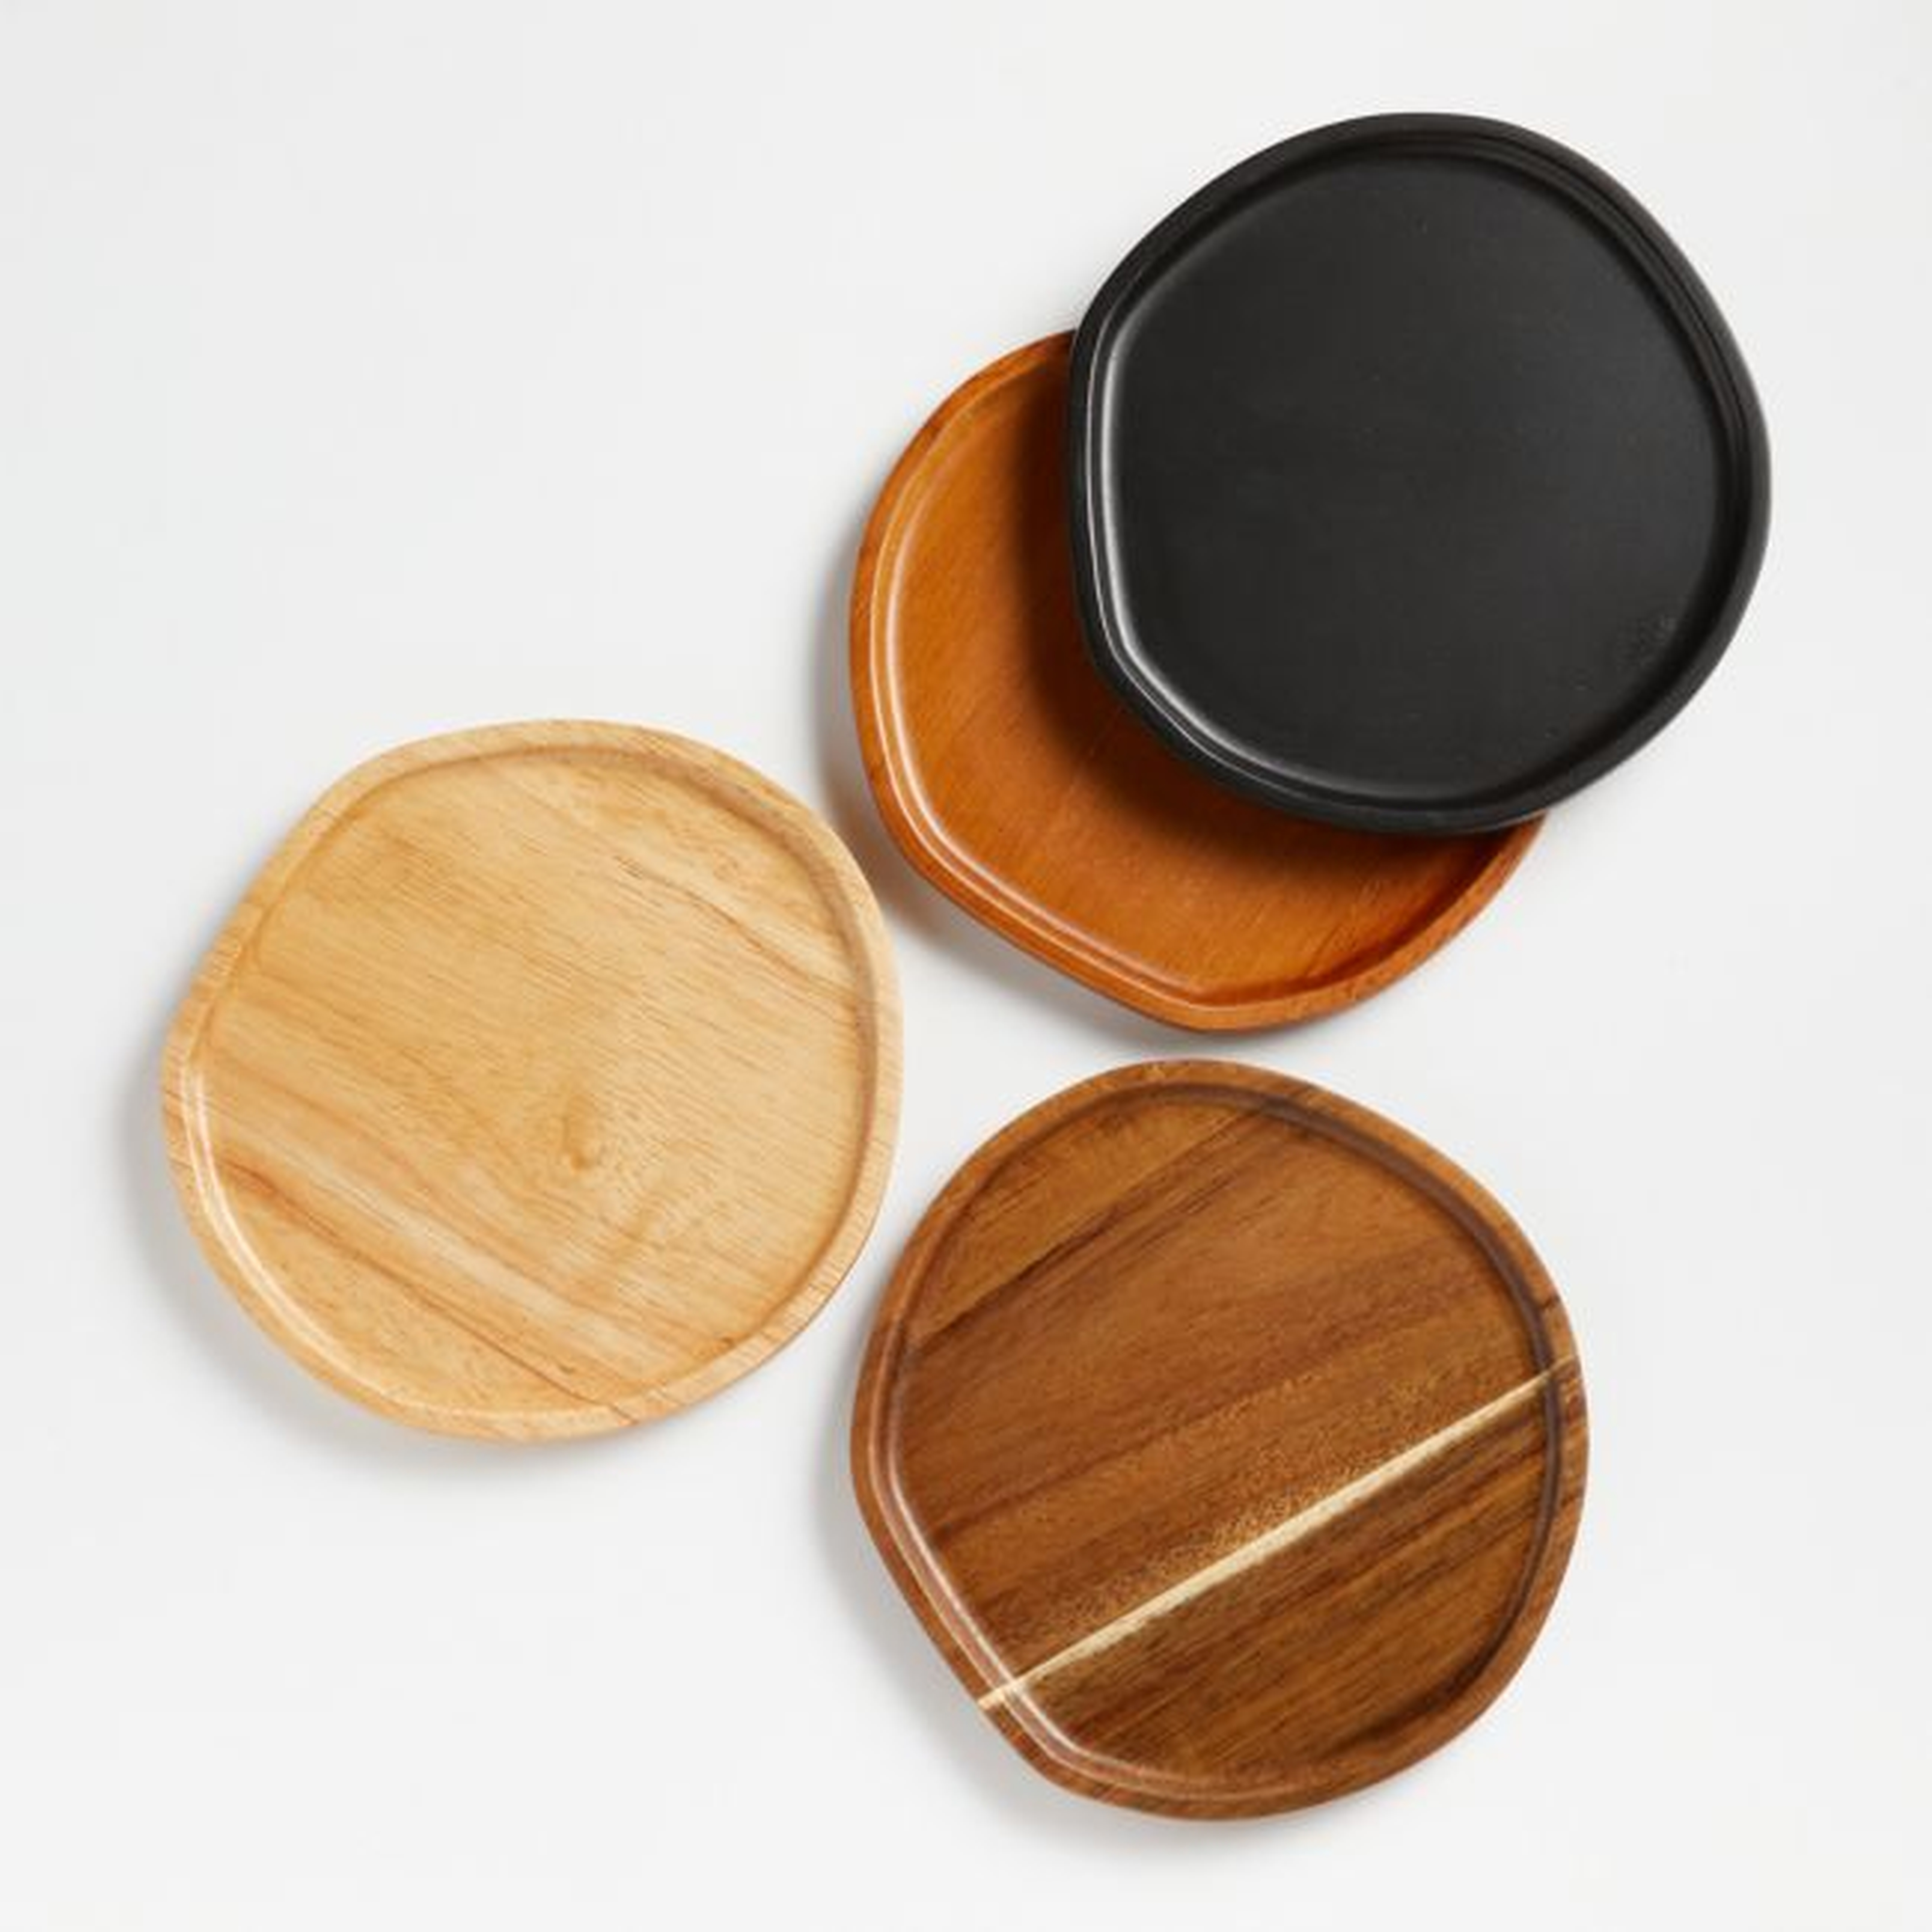 Byhring Mixed Wood Appetizer Plates, Set of 4 - Crate and Barrel